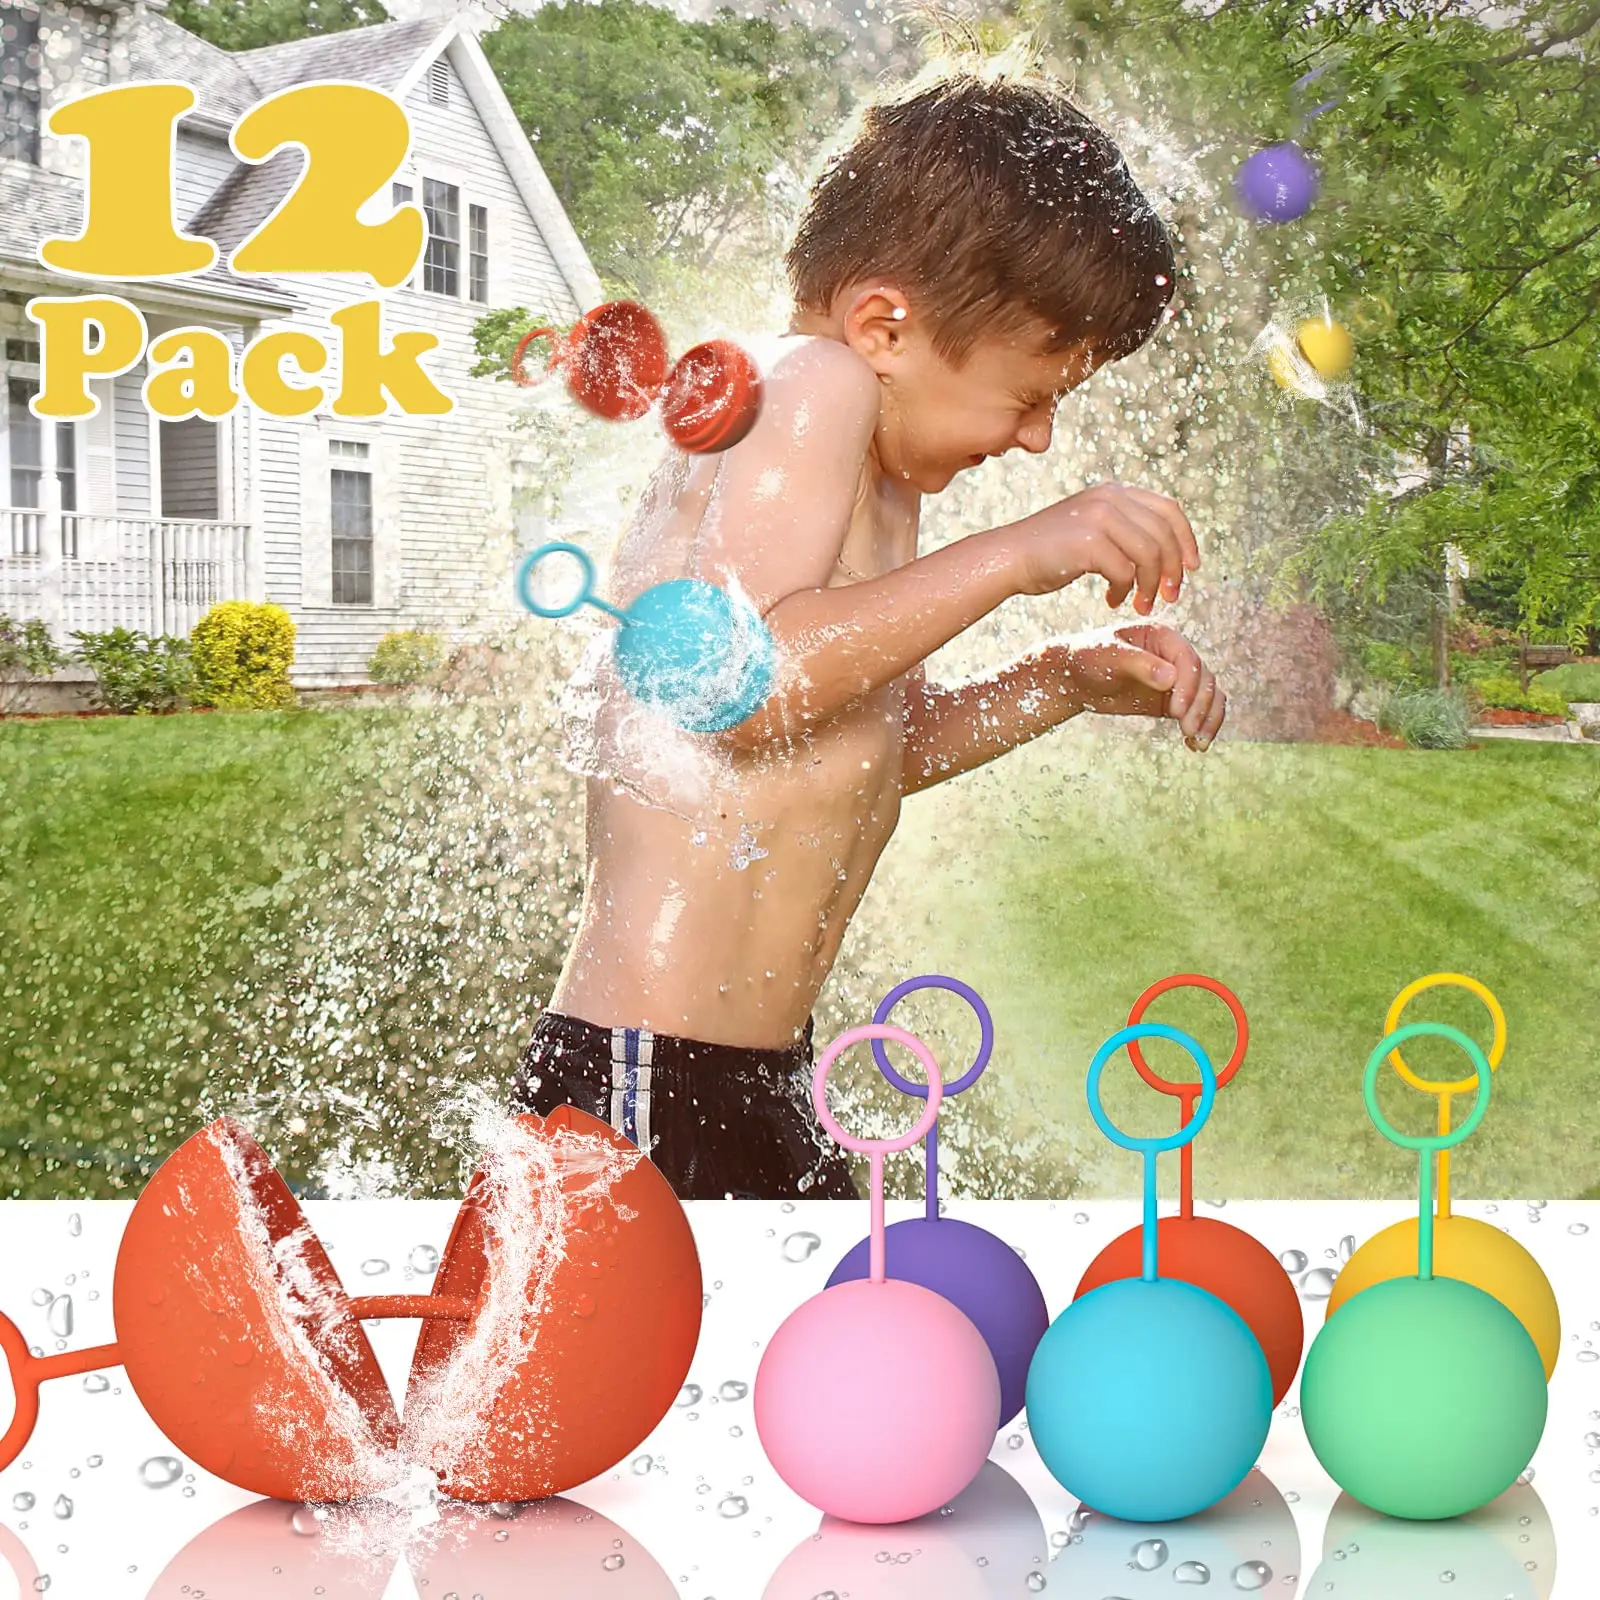 12 Pack Water Balloons for Kids, Reusable Quick-fill Water Balls Outdoor To - $26.44